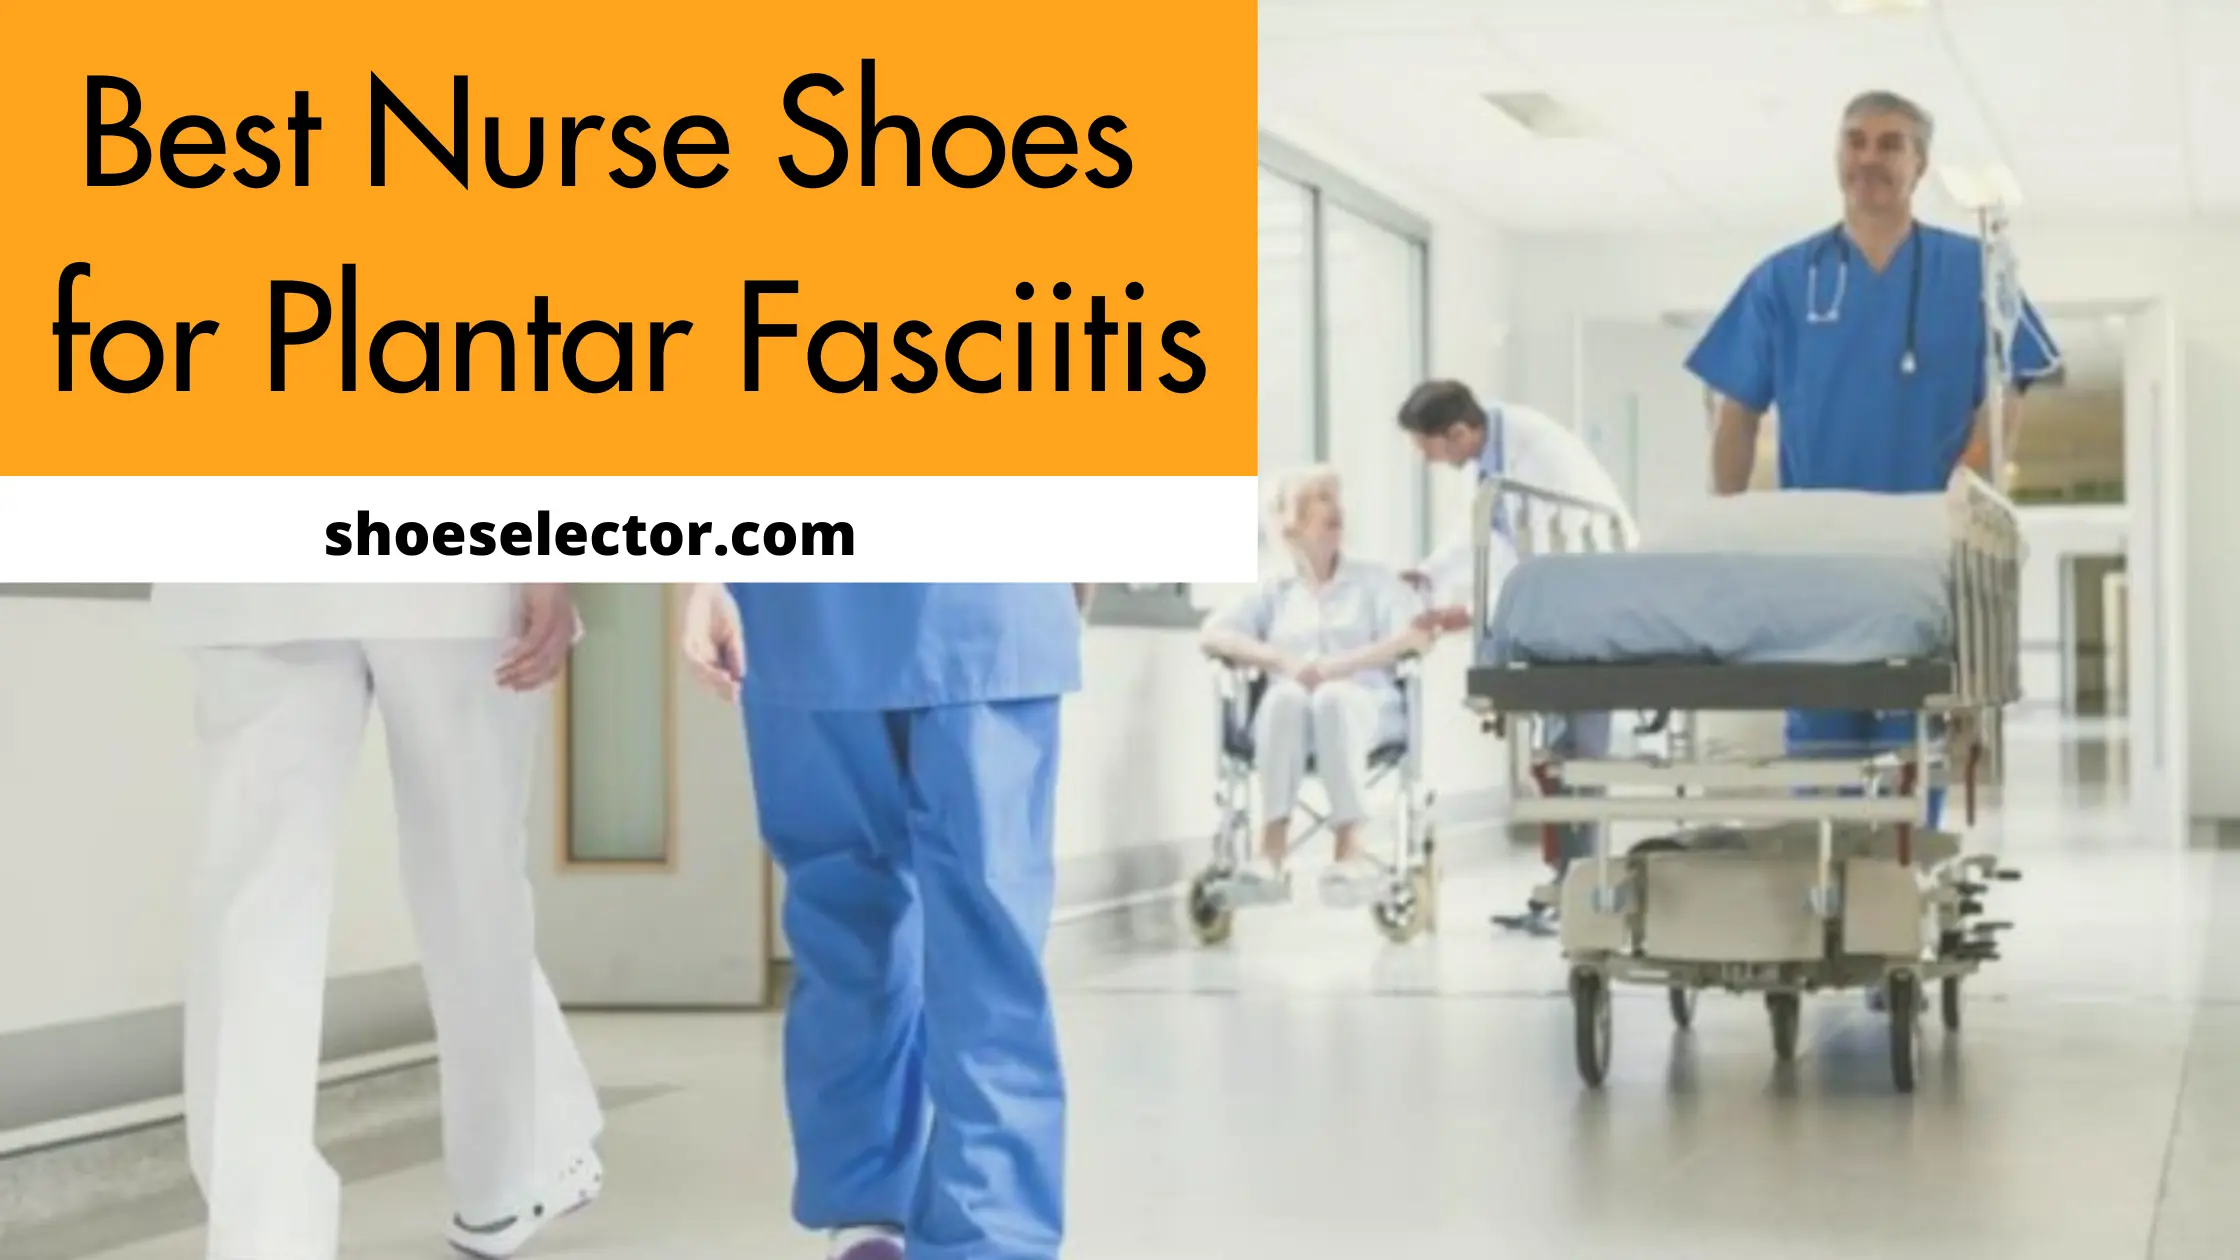 Best Nurse Shoes For Plantar Fasciitis - Complete Buying Guides